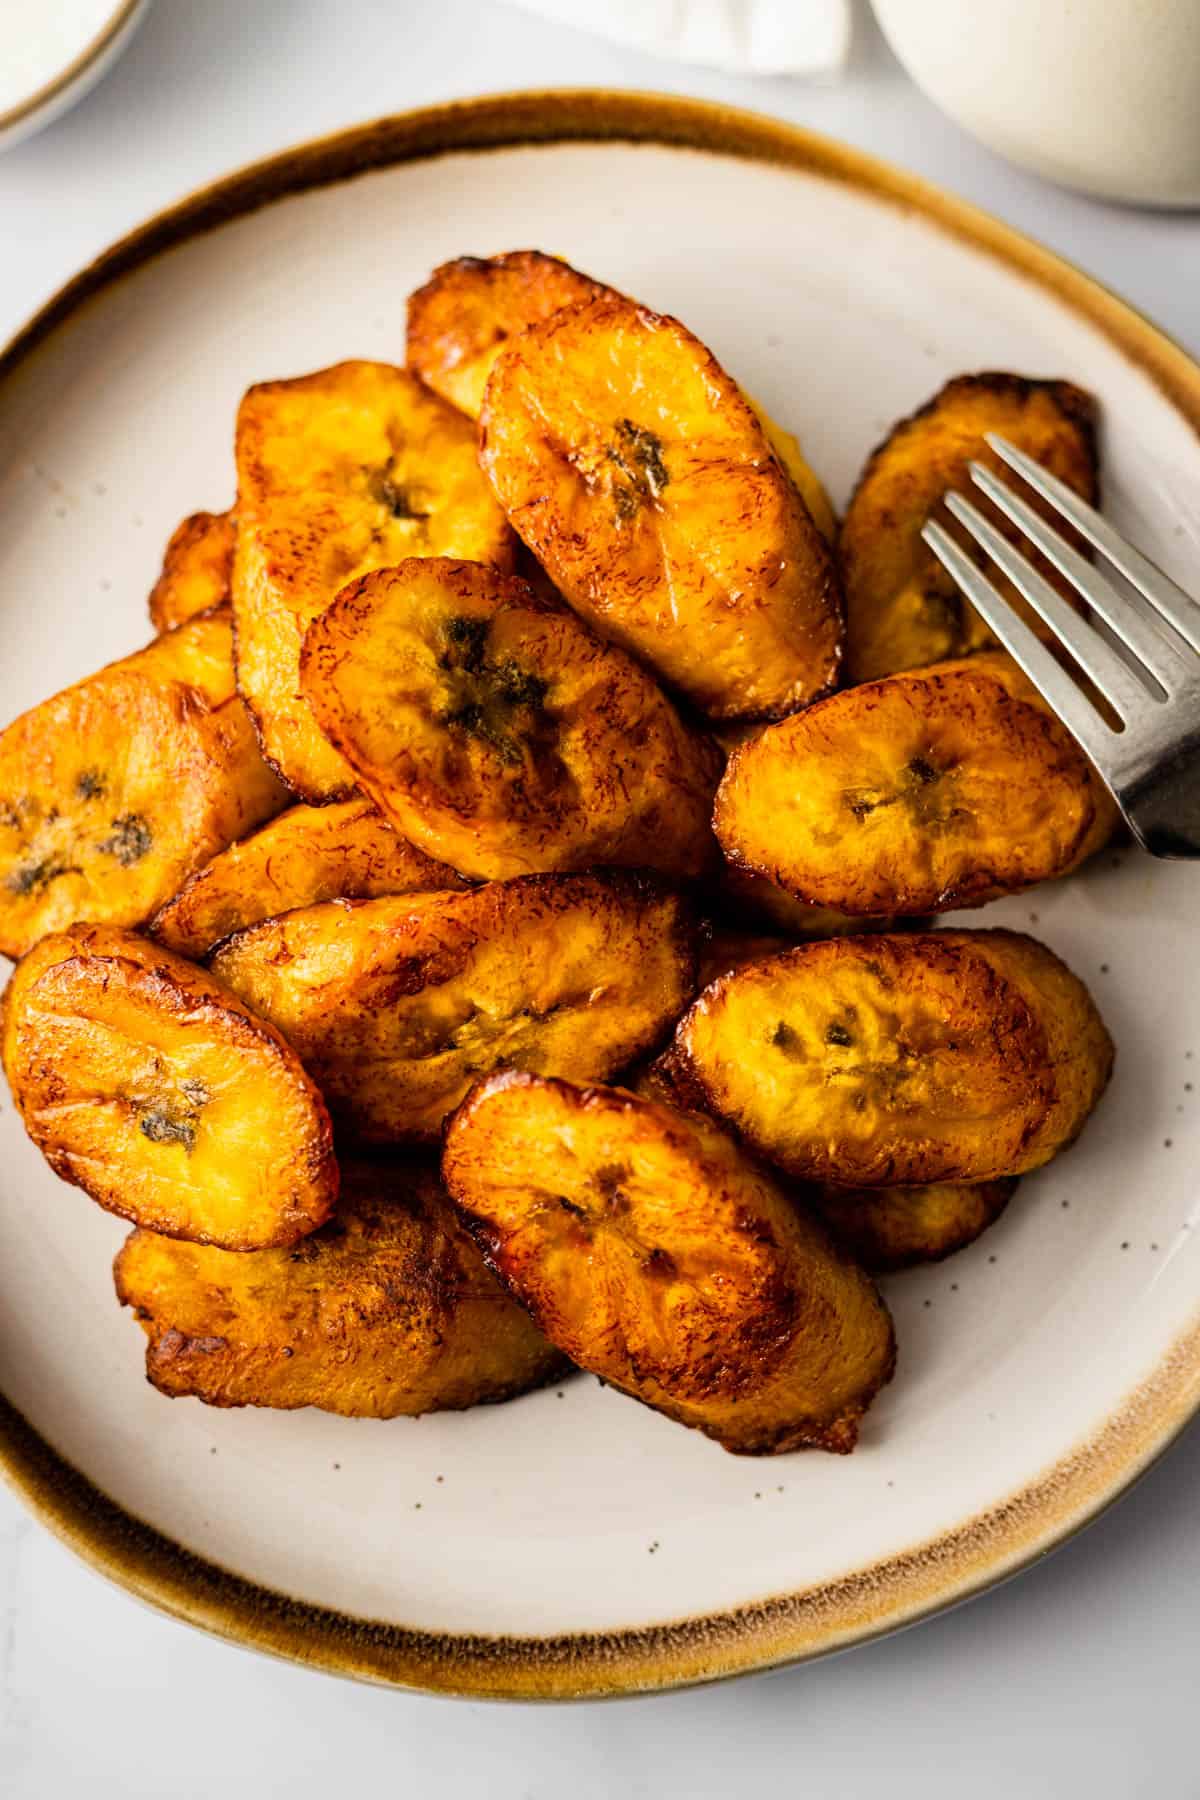 Plate of fried sweet plantains